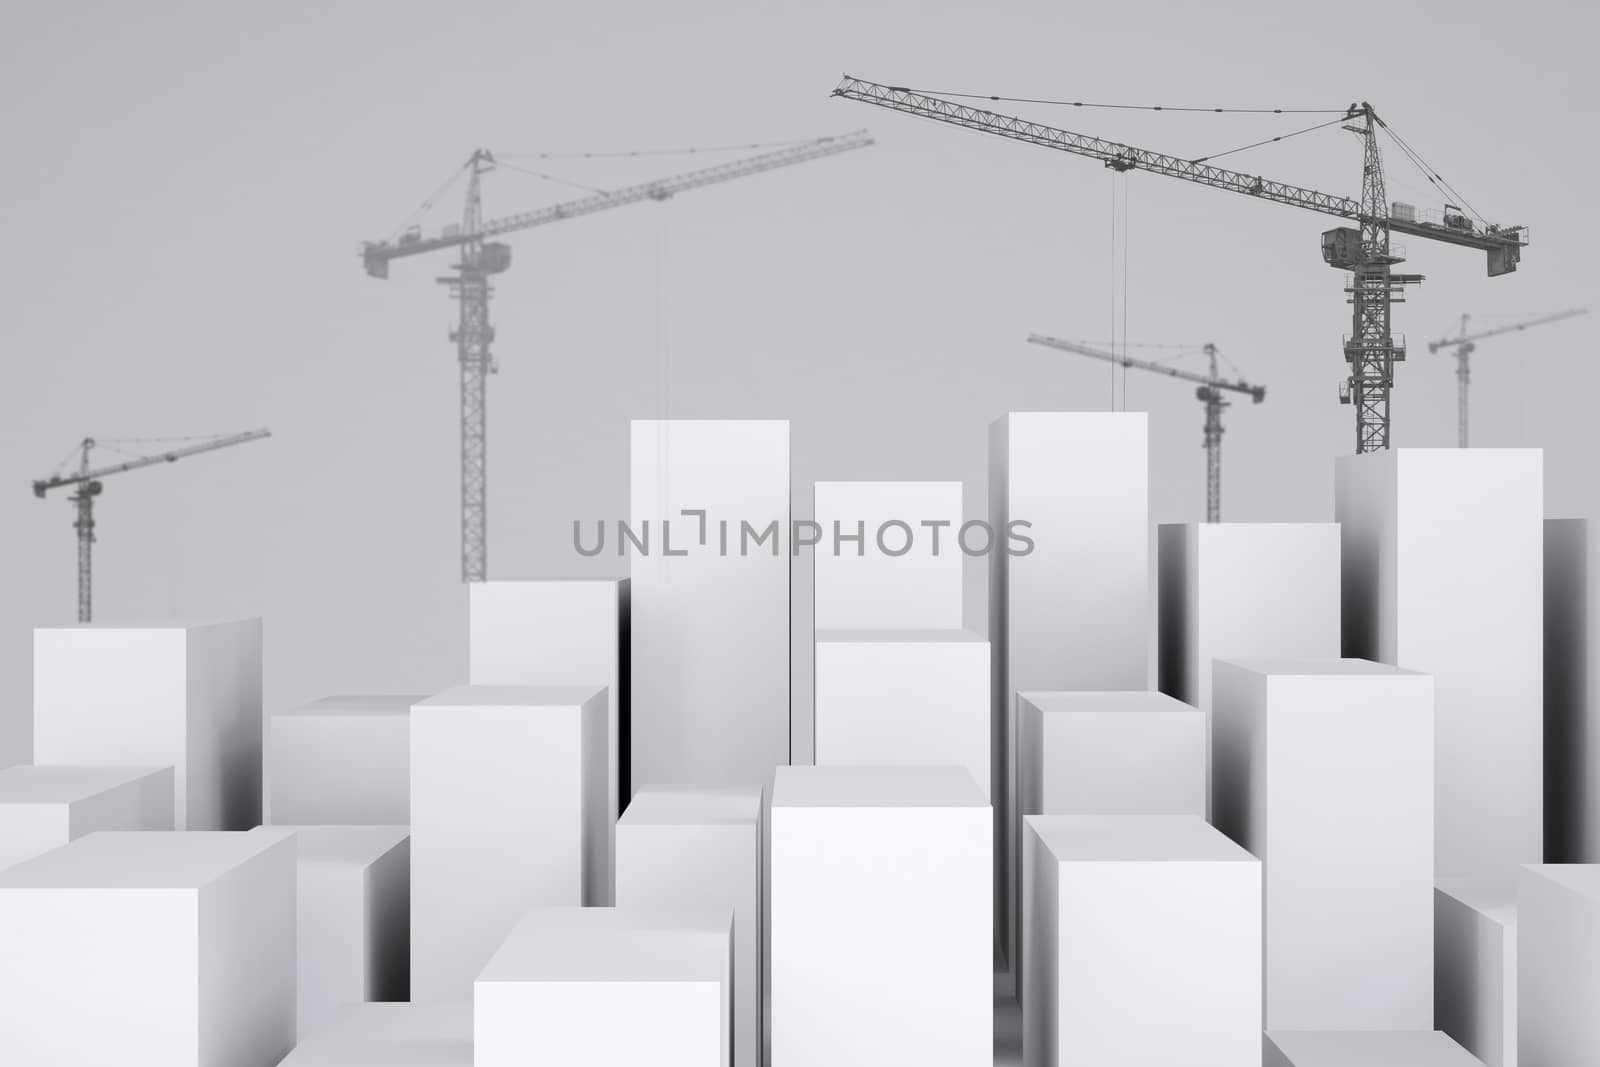 White cubes with wire-frame tower cranes. Cropped image by cherezoff